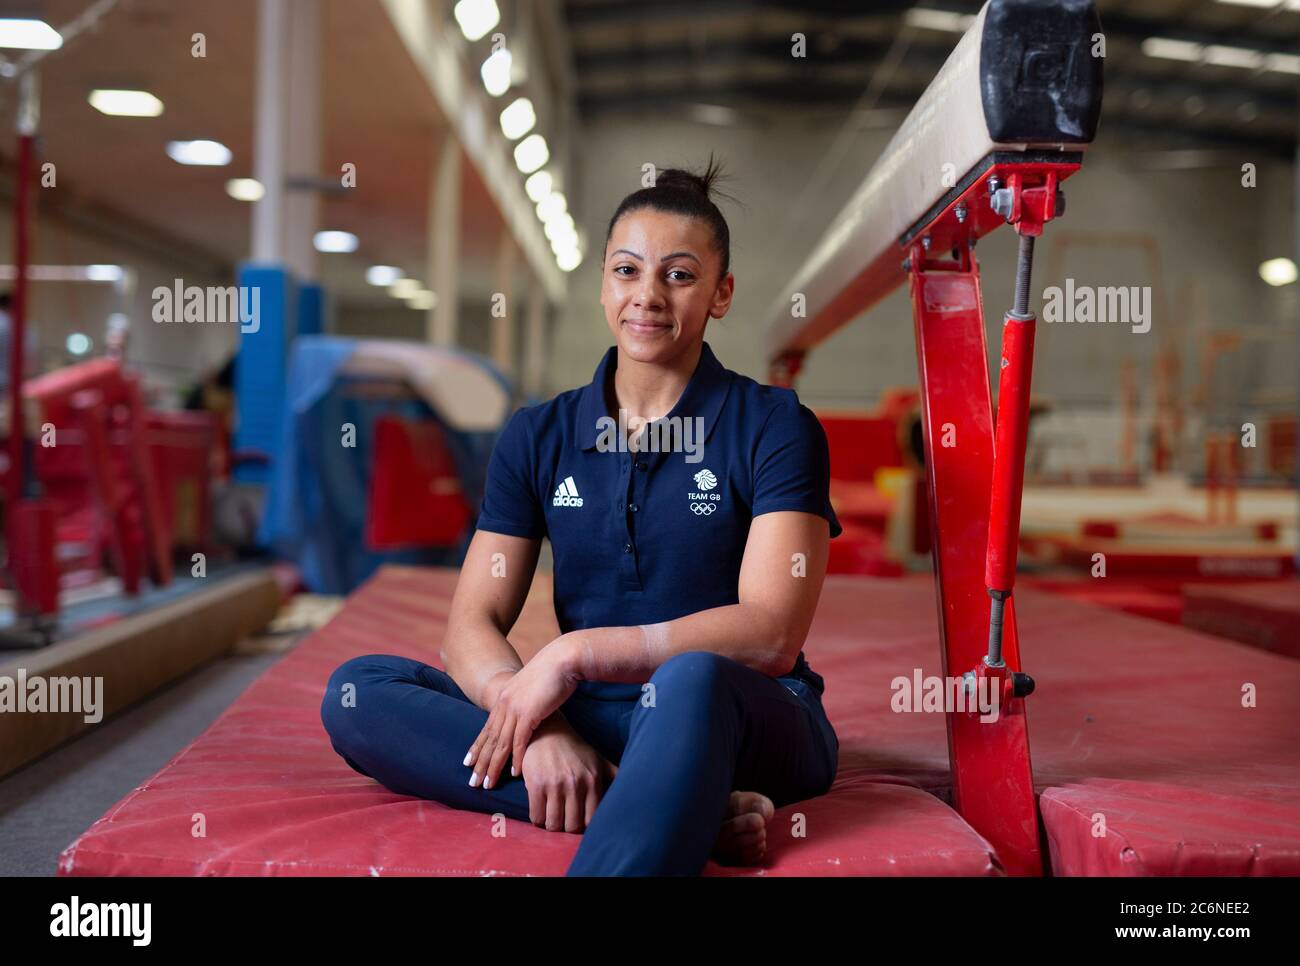 Olympic gymnast Becky Downie. She is at the Notts Gymnastic Academy in Nottingham Stock Photo